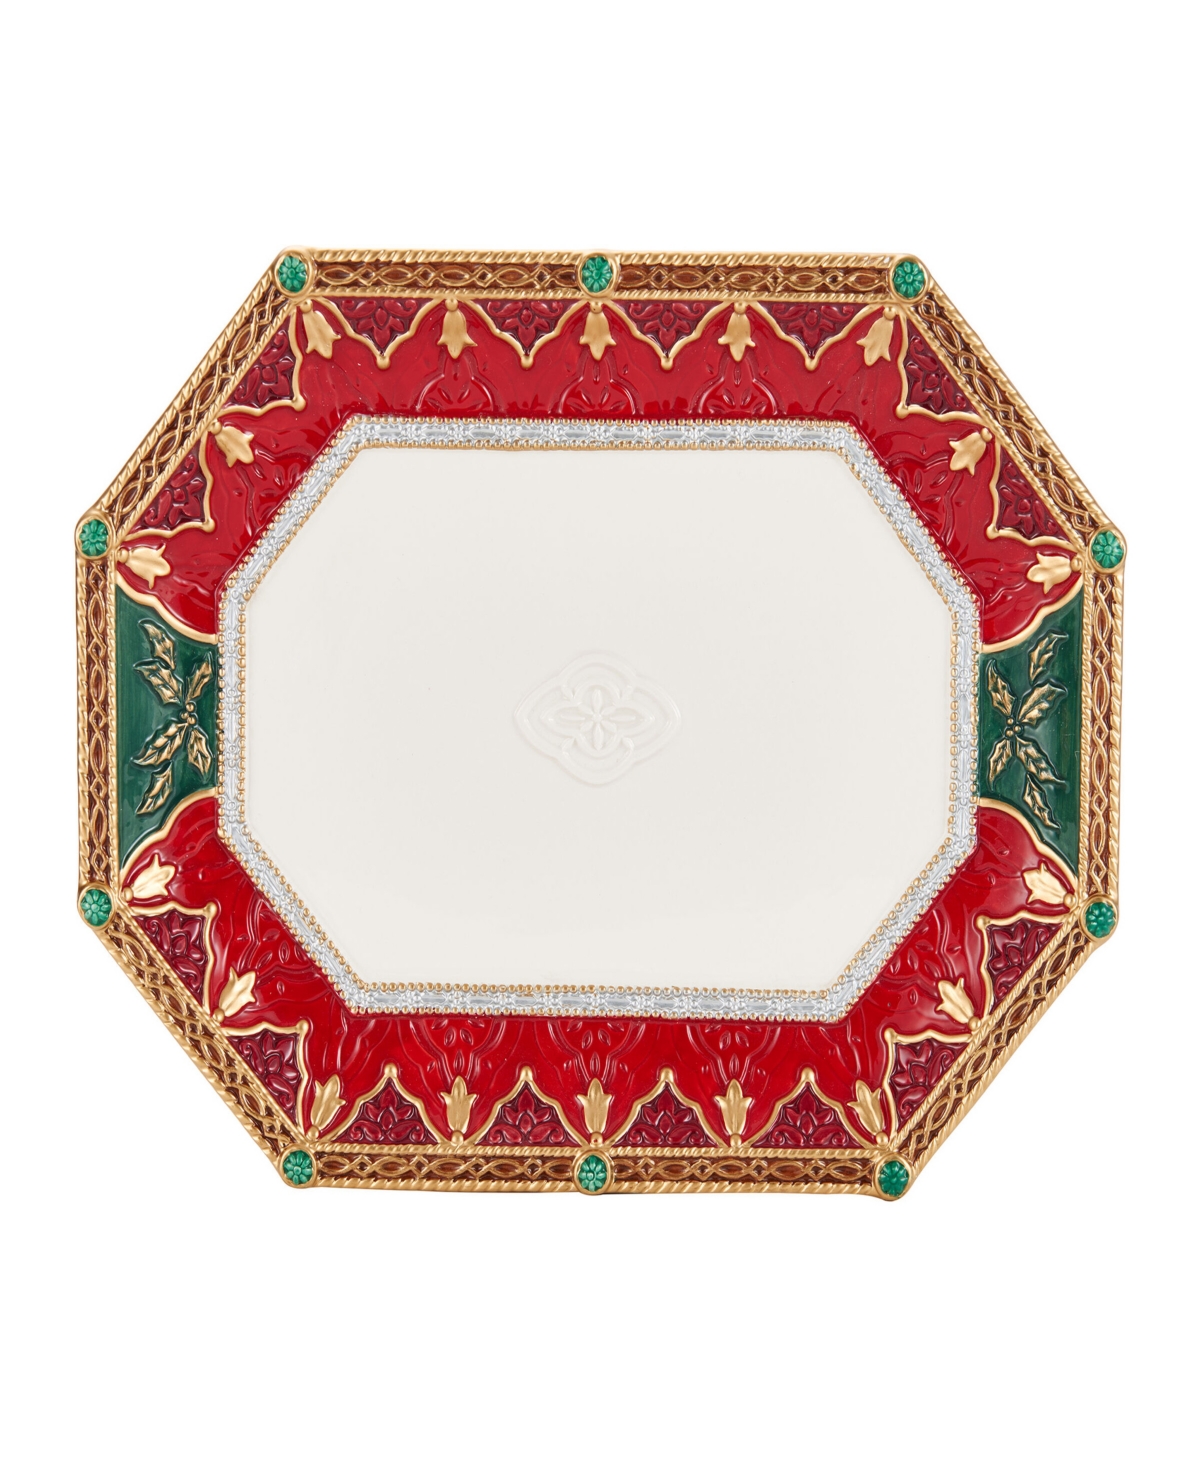 Fitz And Floyd Noel Holiday Large Platter, 16-in X 12-in In Red